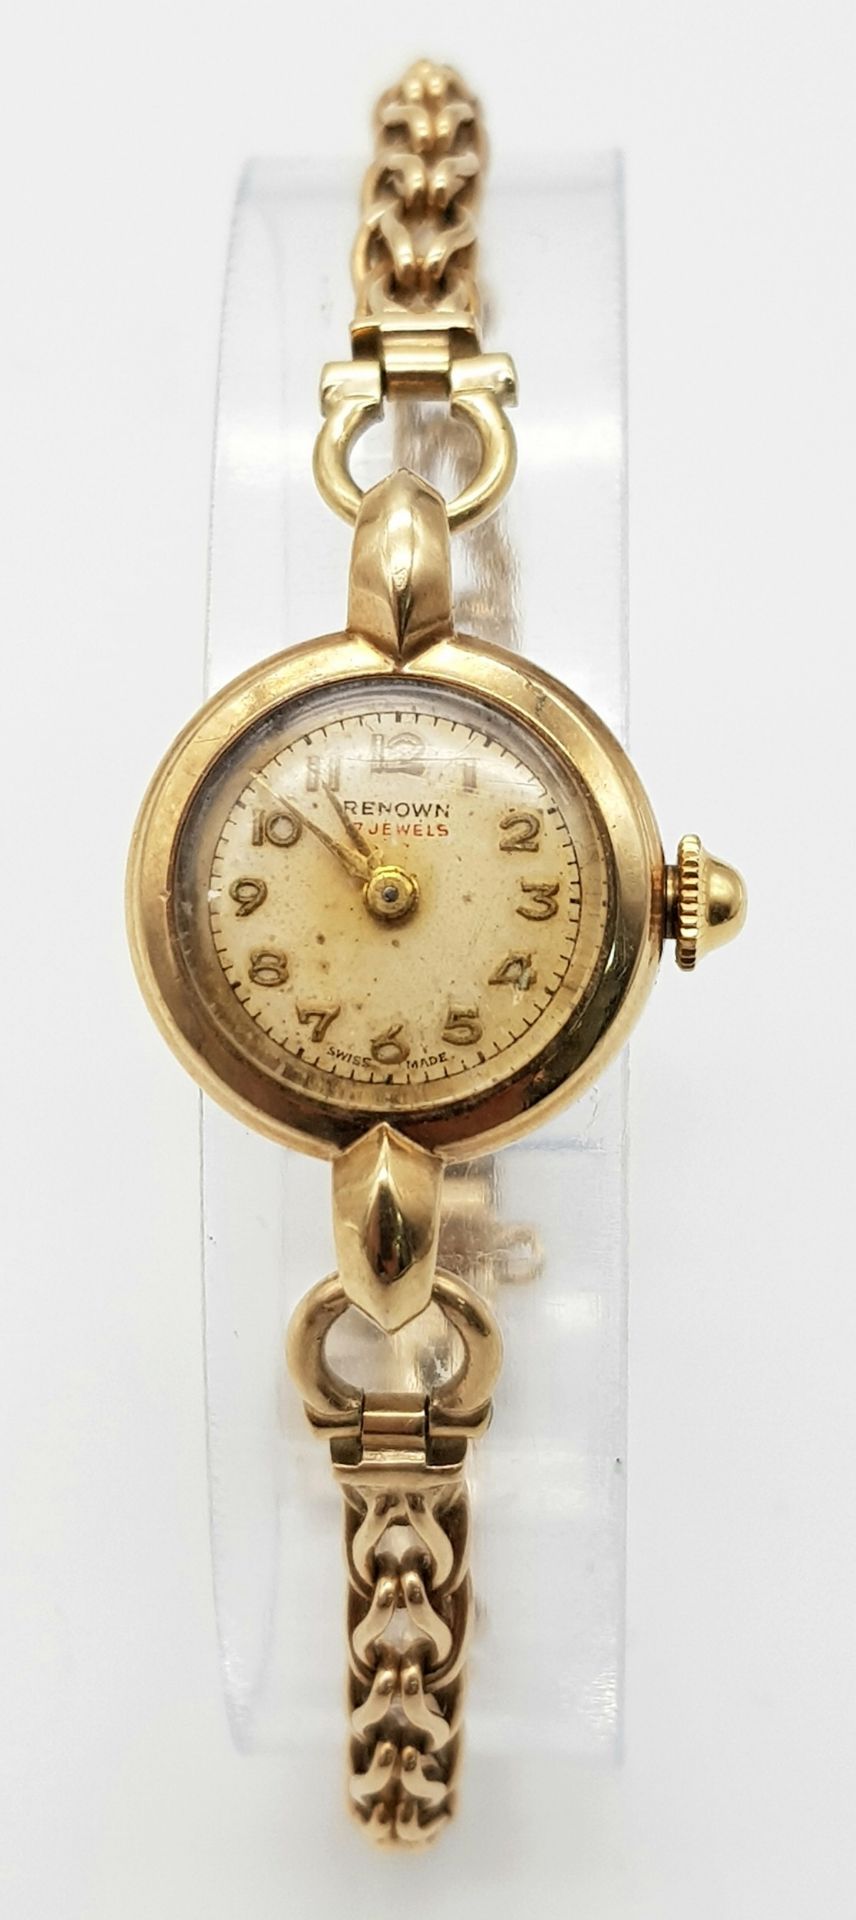 A Vintage 9K Yellow Gold Renown Ladies Watch. 9K gold bracelet and case - 18mm. Patinaed dial. - Image 5 of 6